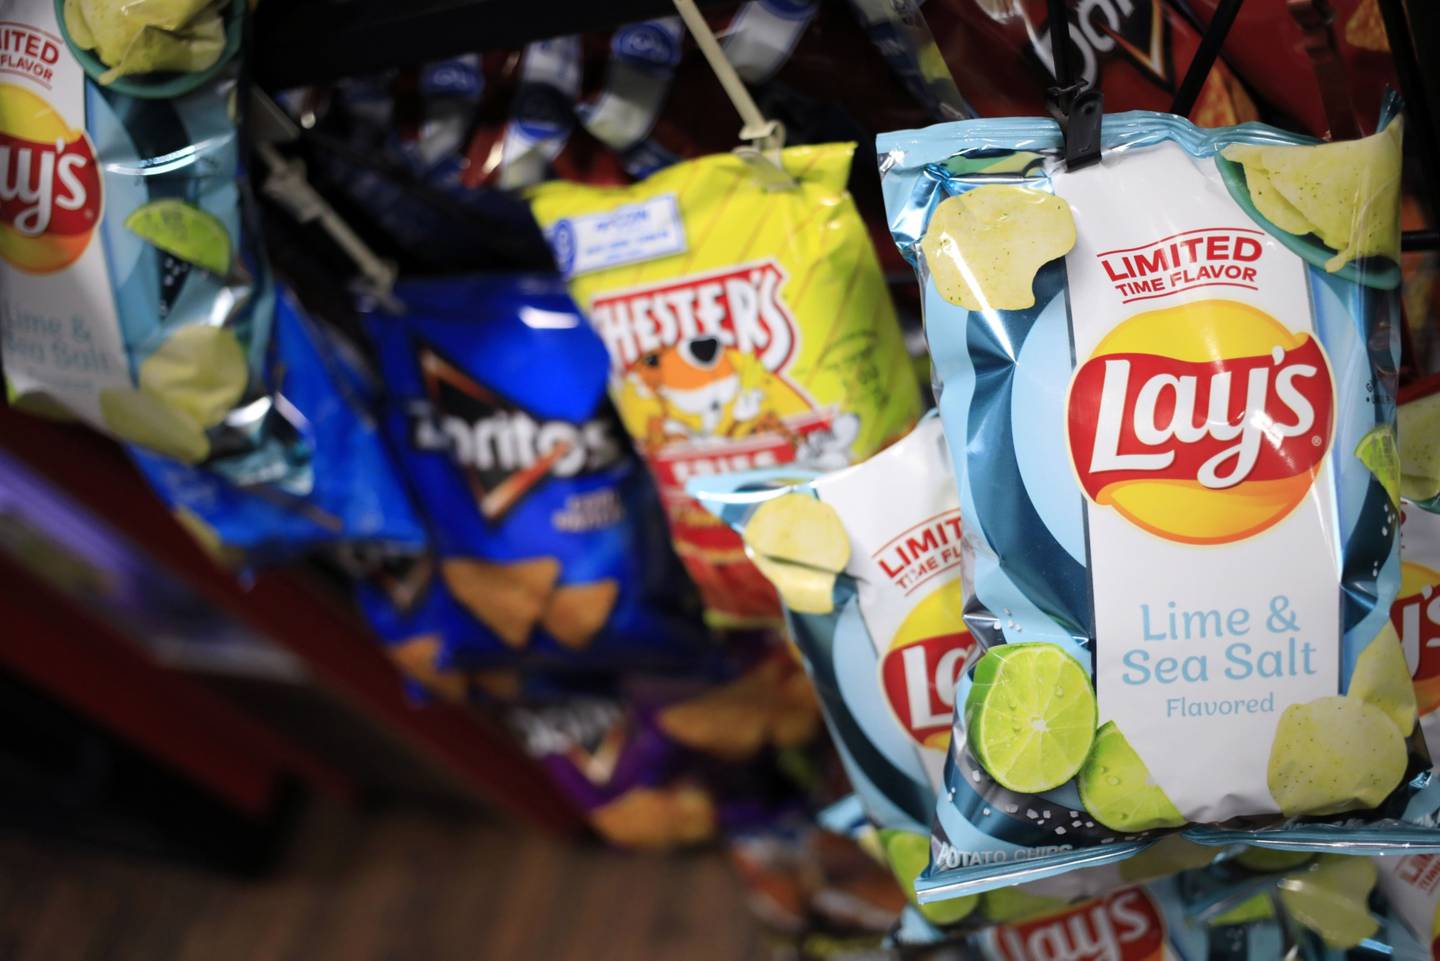 Bags of PepsiCo Inc. brand Lay's potato chips for sale at a grocery store in Bagdad, Kentucky, U.S., on Friday, April 9, 2021. PepsiCo Inc. is scheduledto release earnings figures on April 15.